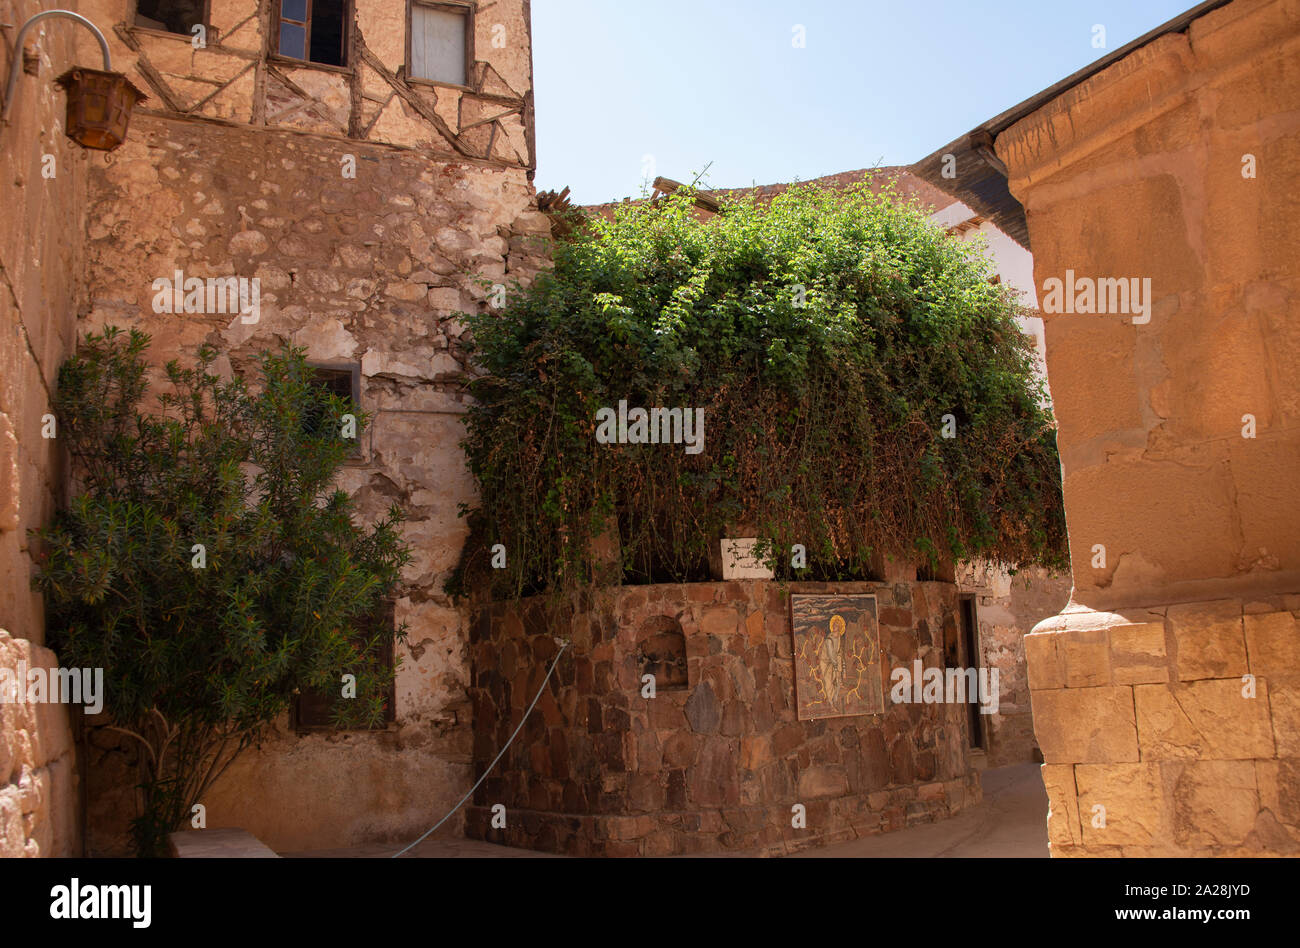 Burning bush said to be seen by Moses in the Old Testament inside Saint Catherine's Monastery Stock Photo